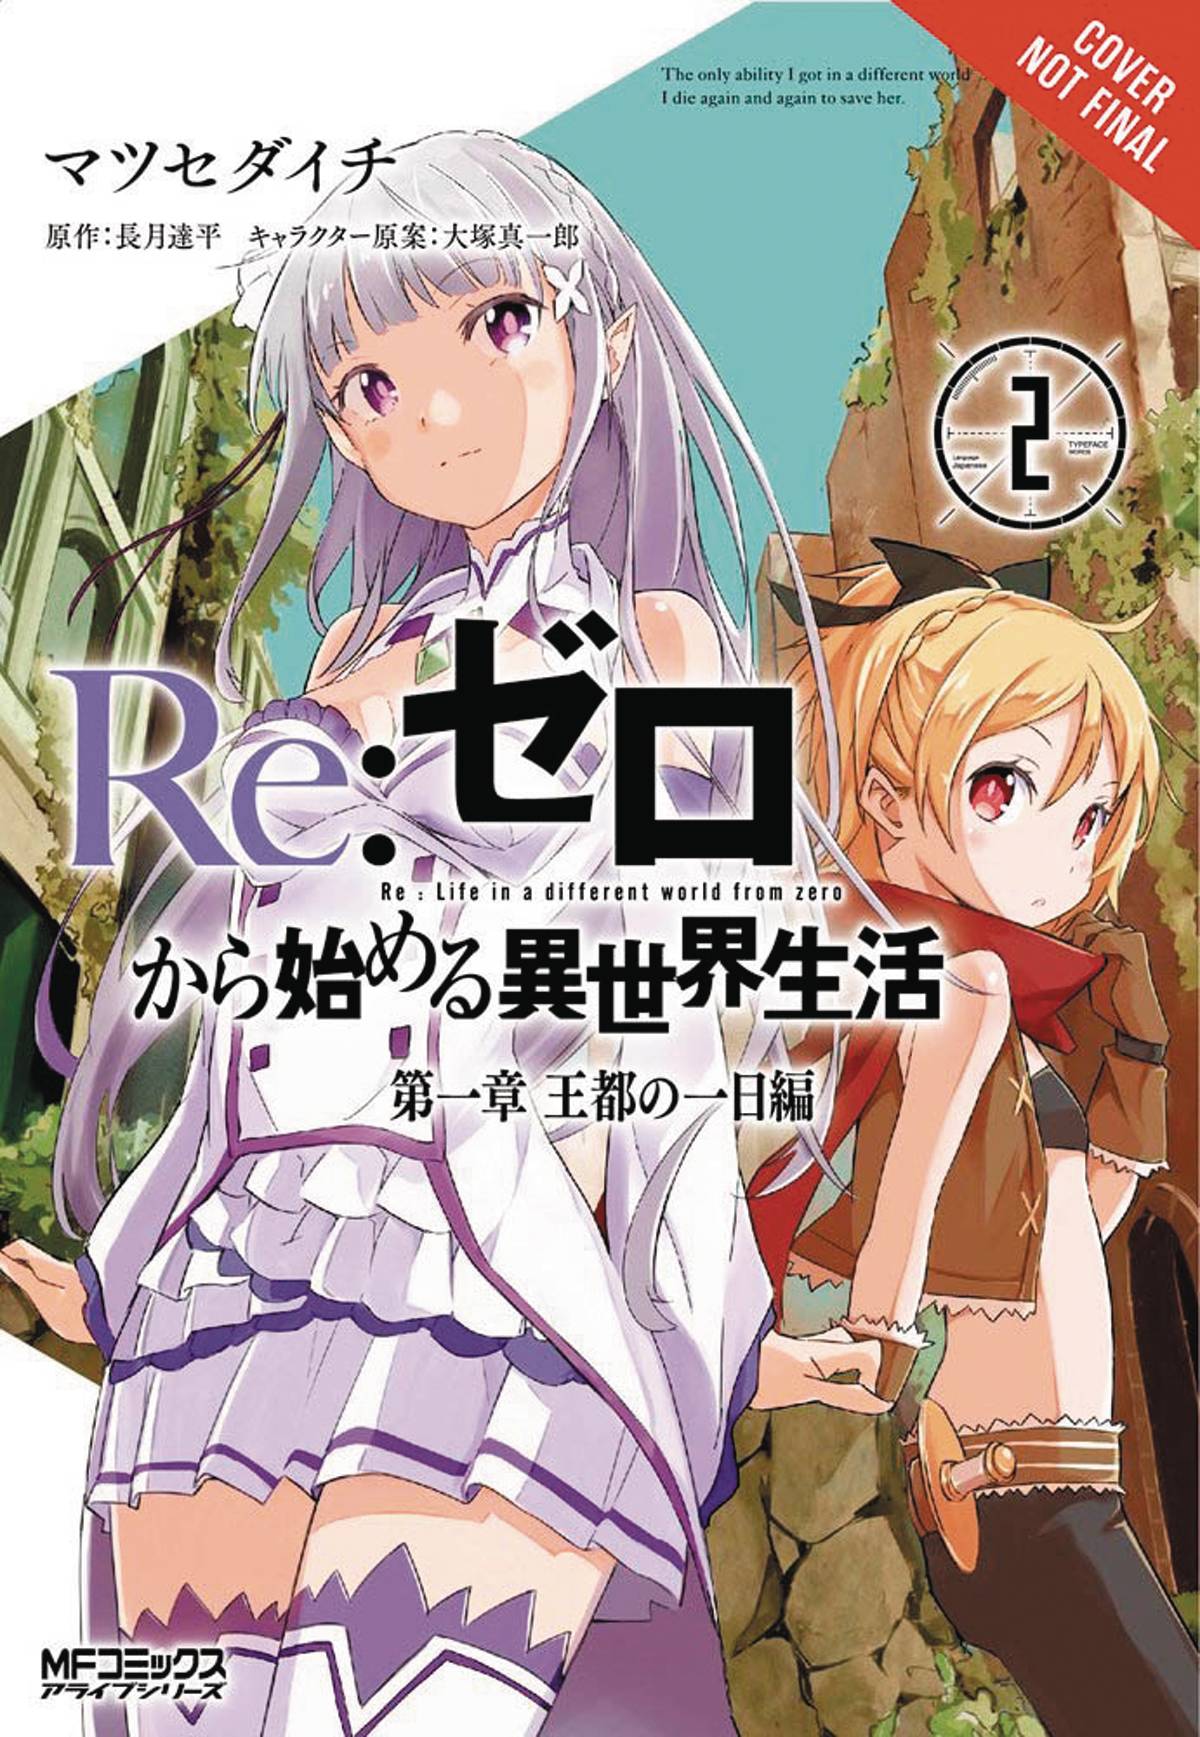 RE ZERO SLIAW CHAPTER 2 WEEK MANSION GN VOL 01